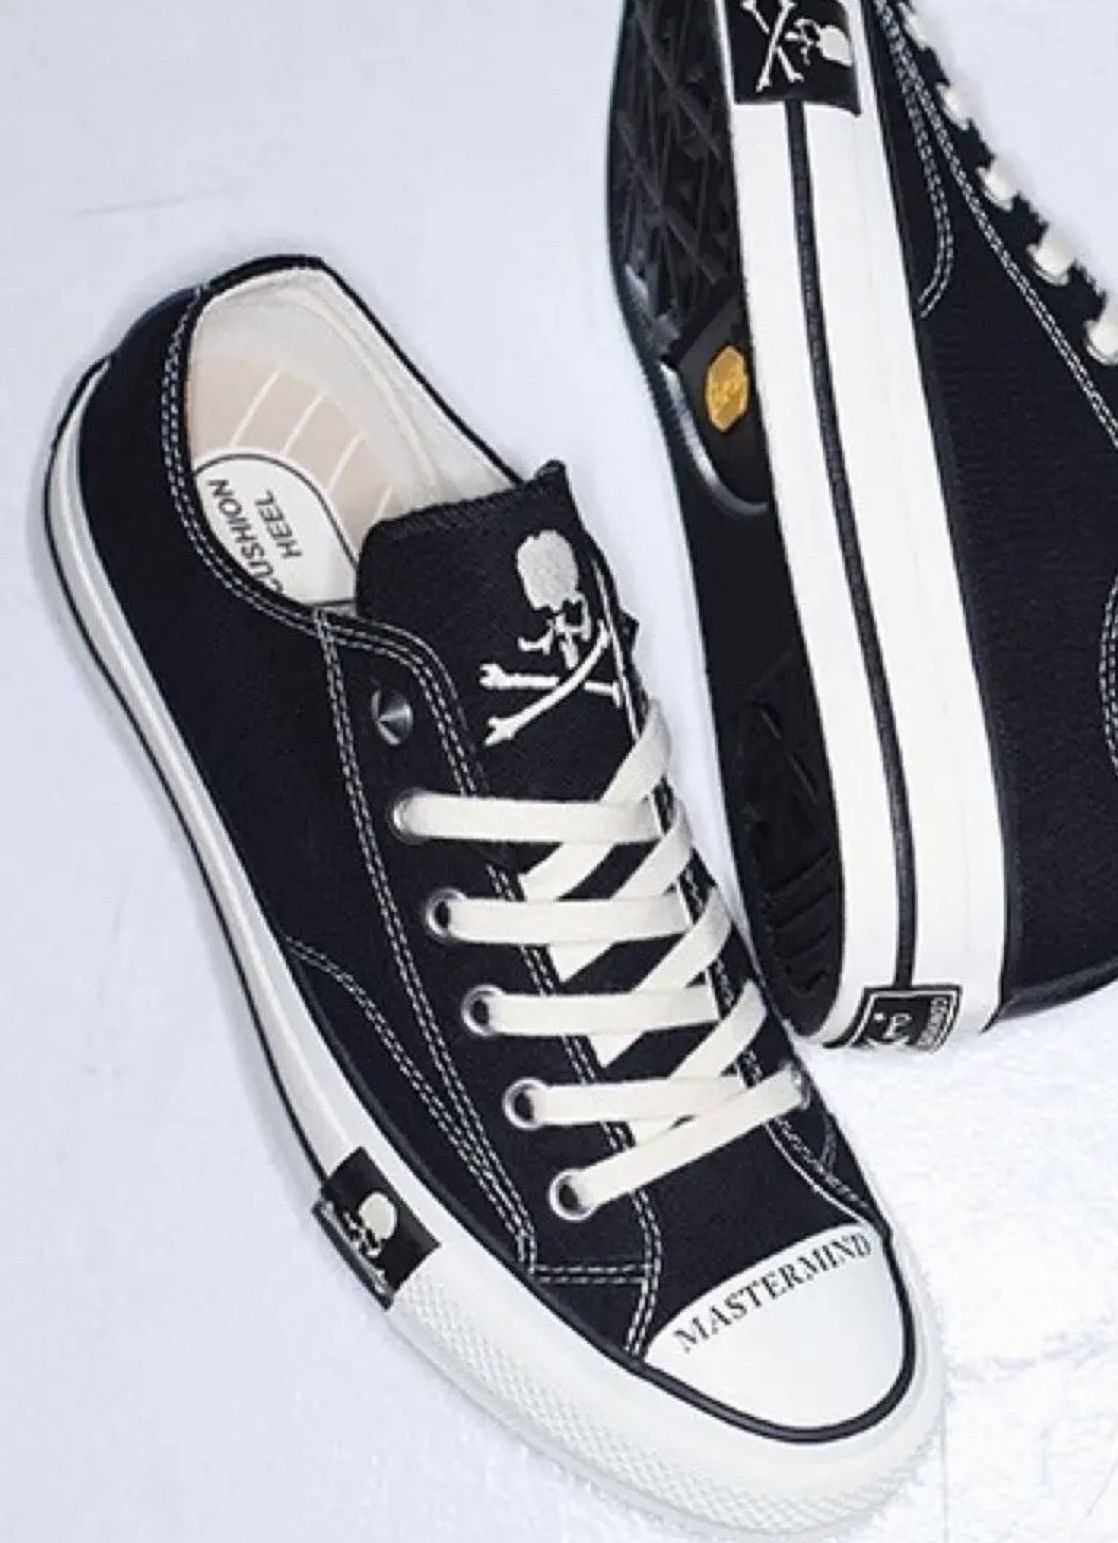 Converse mastermind JAPAN CONVERSE ADDICT CHUCK TAYLOR Sneakers US9.5 |  Grailed